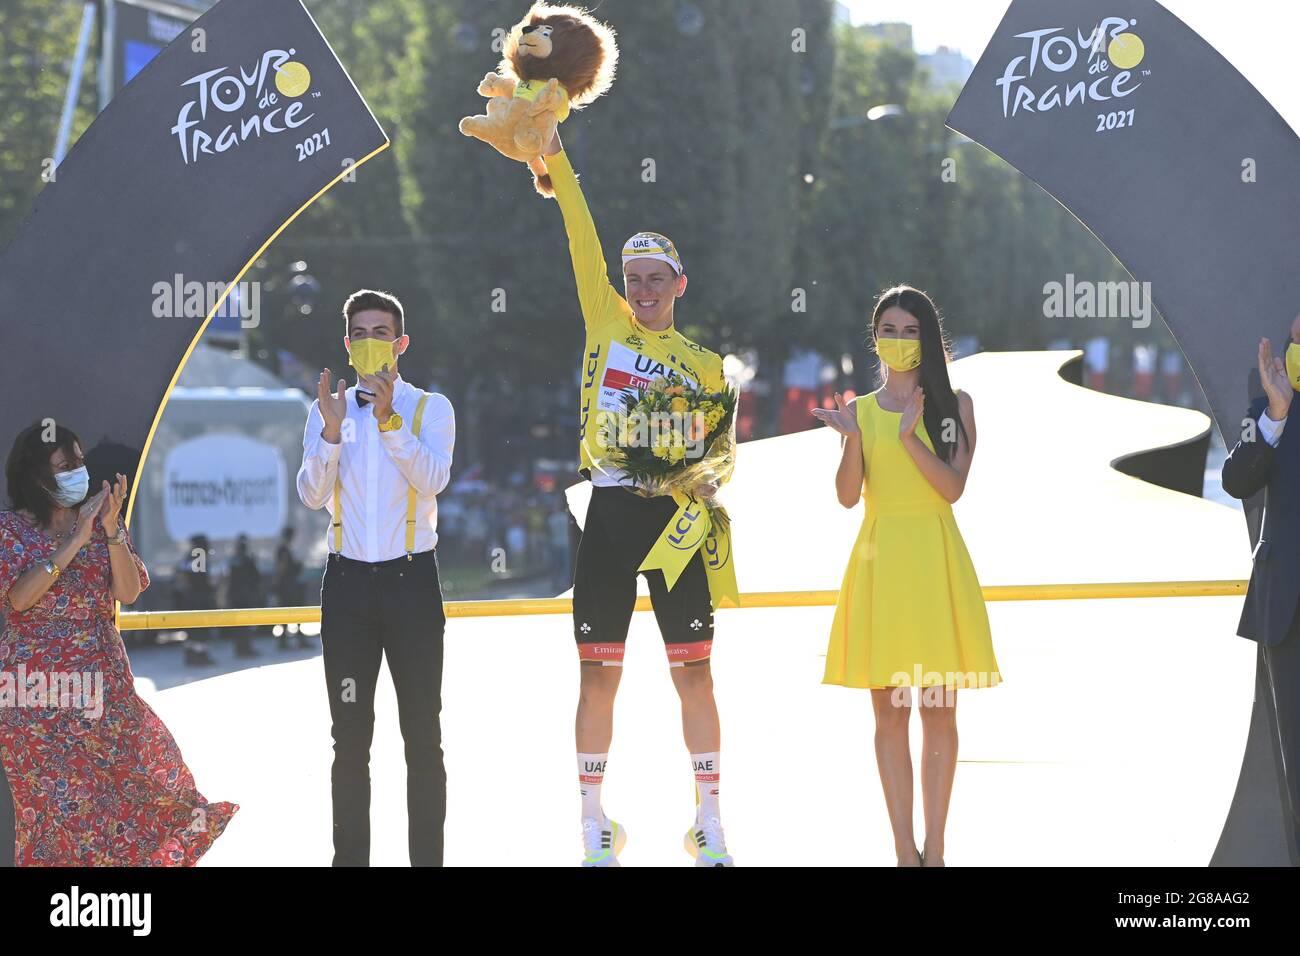 VAN AERT Wout (BEL) of JUMBO - VISMA wins the Stage 21 in a sprint finish for the final day of racing in the Tour de France, Sunday 18th July, 2021. Photo credit should read:Pete Goding/GodingImages Stock Photo